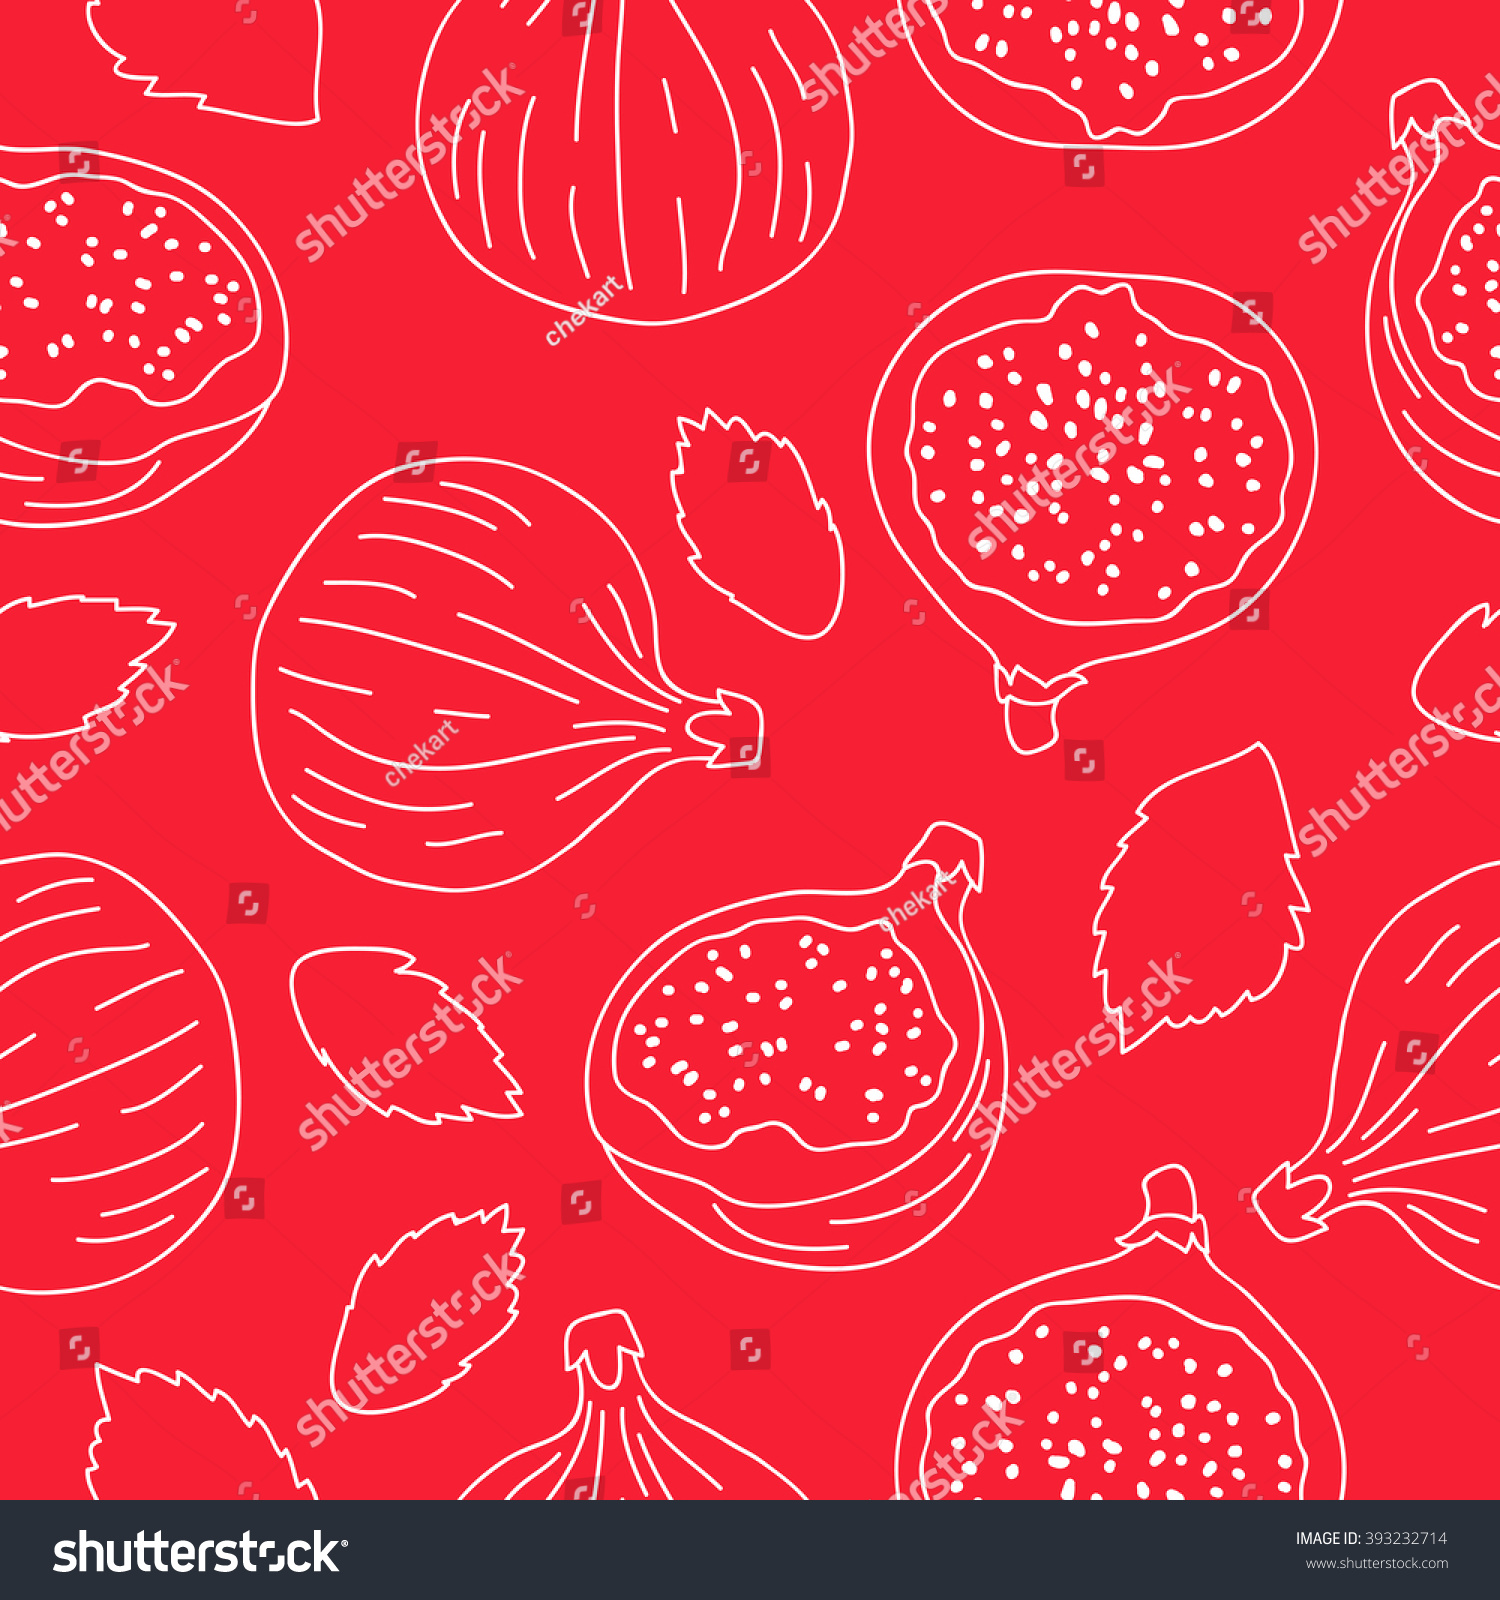 Seamless vector pattern of the fruits of a fig on a red background. #393232714